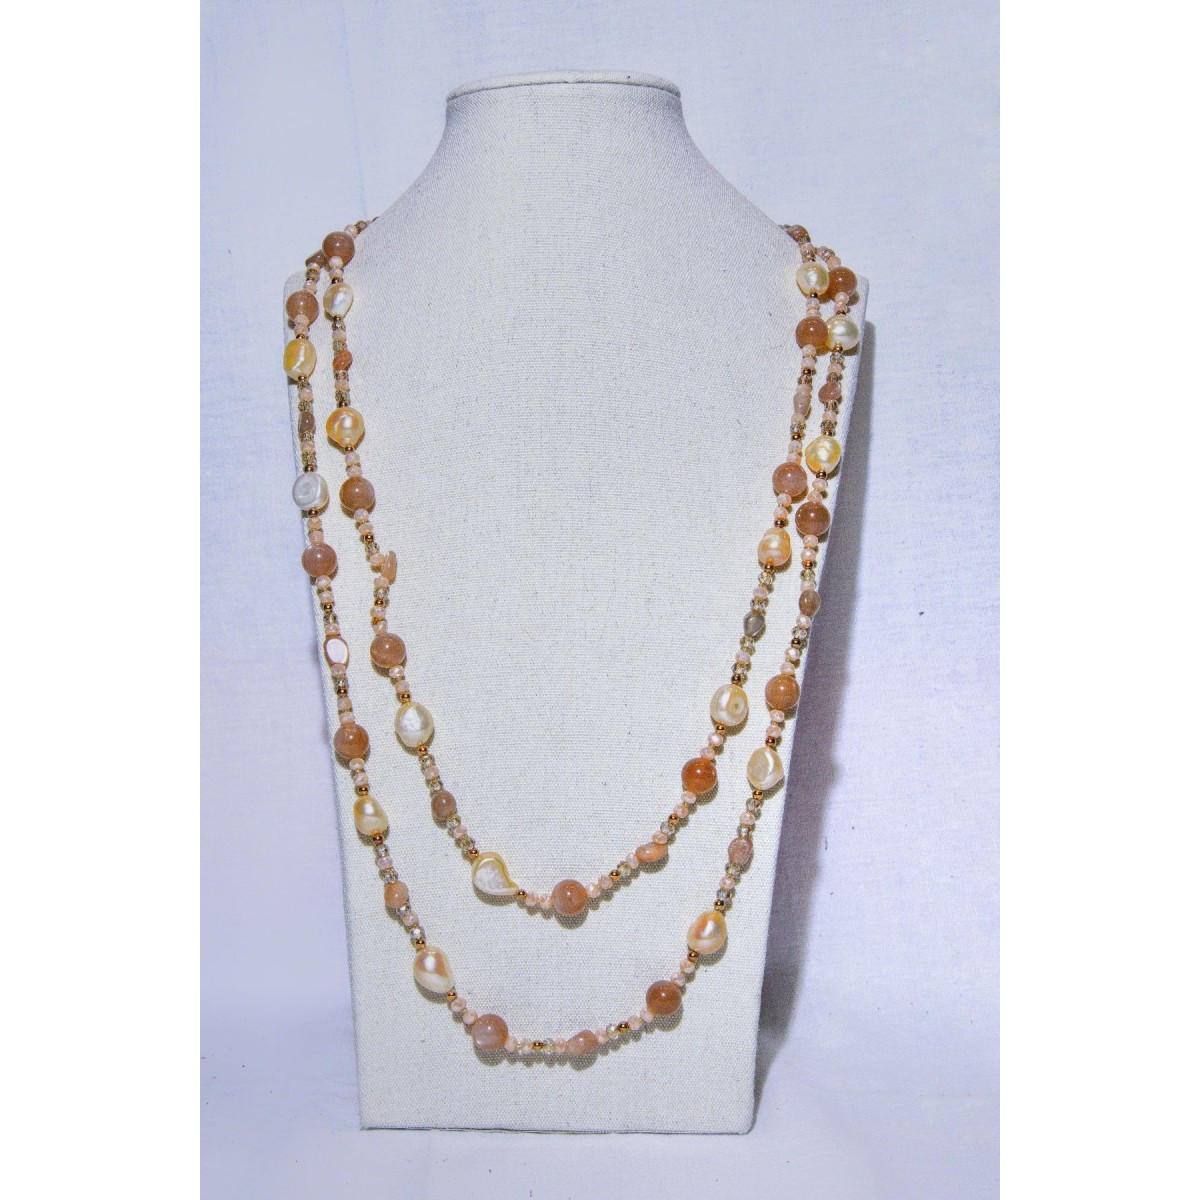 PINKISH RIVER PEARLS NECKLACE